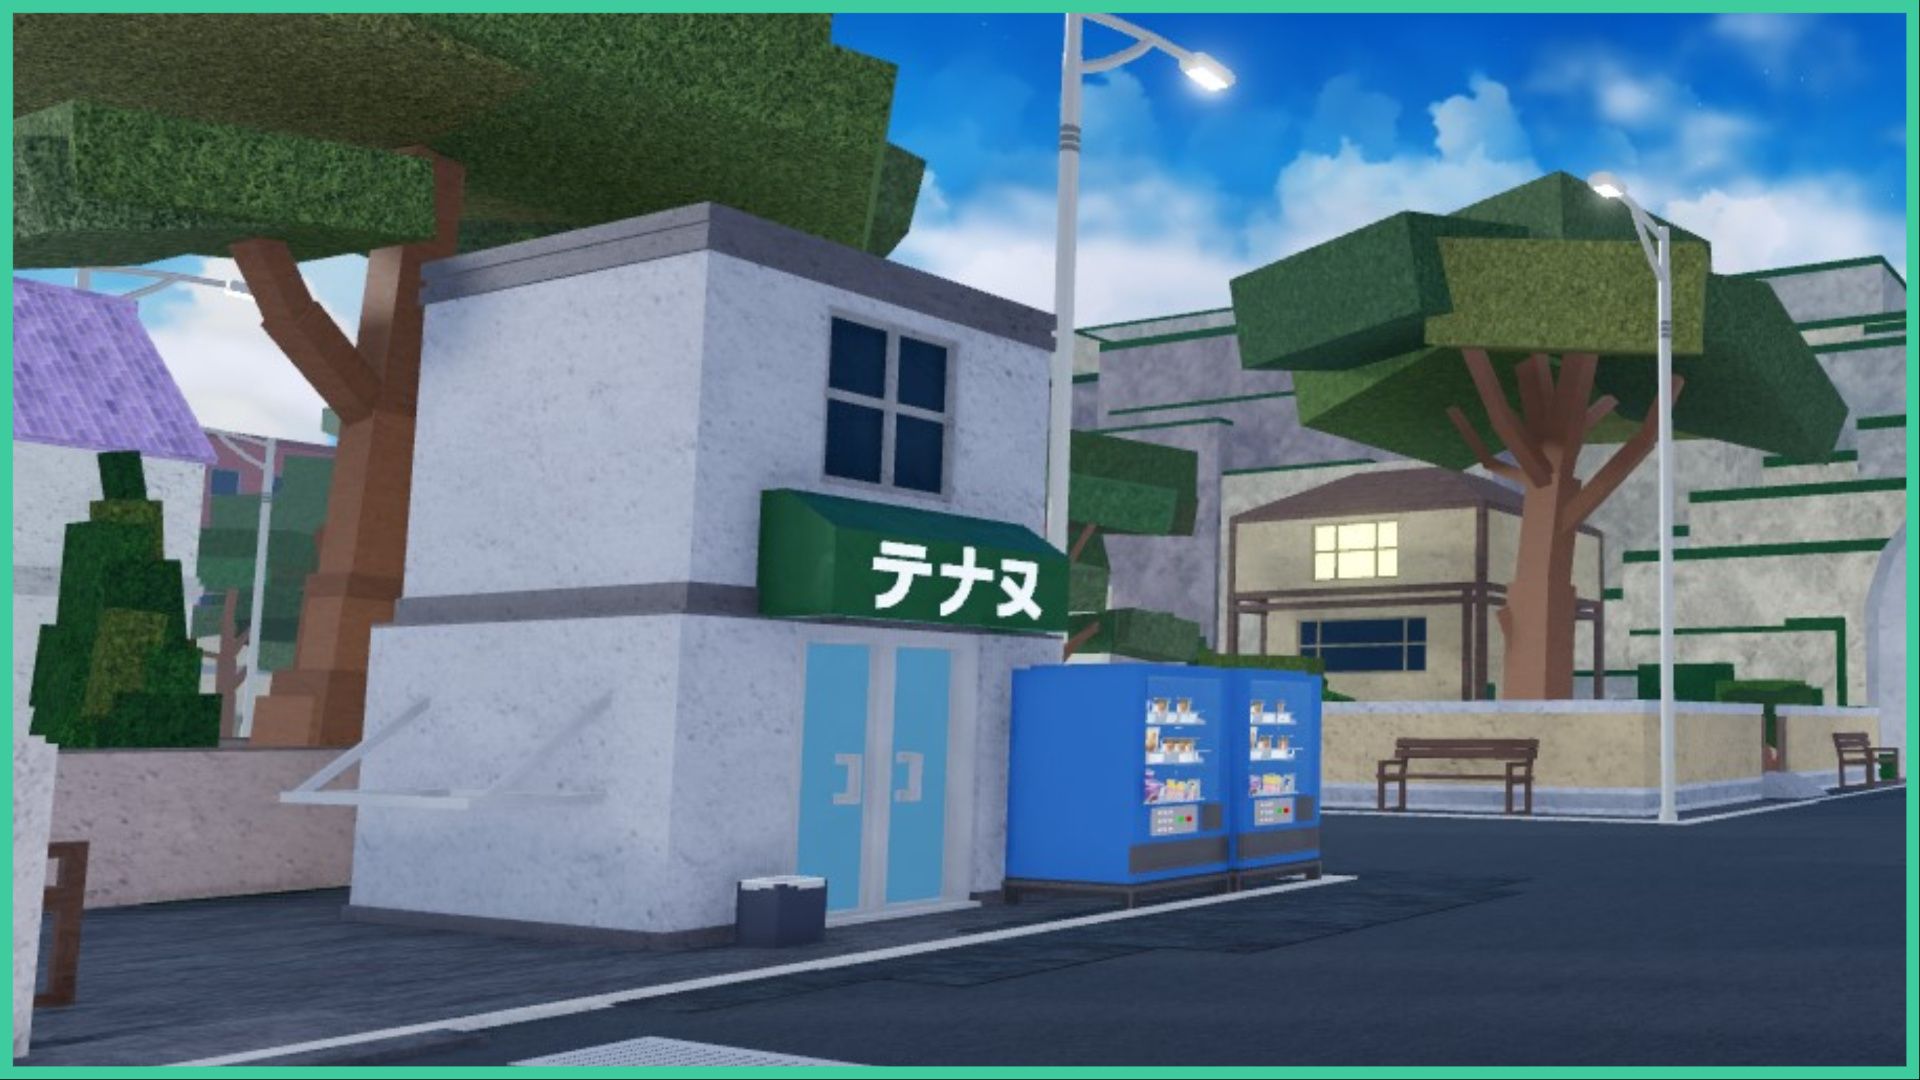 screenshot of a building with kanji written on the sign for our type soul blue elixir guide, there are 2 blue vending machines in front of the building with various products inside